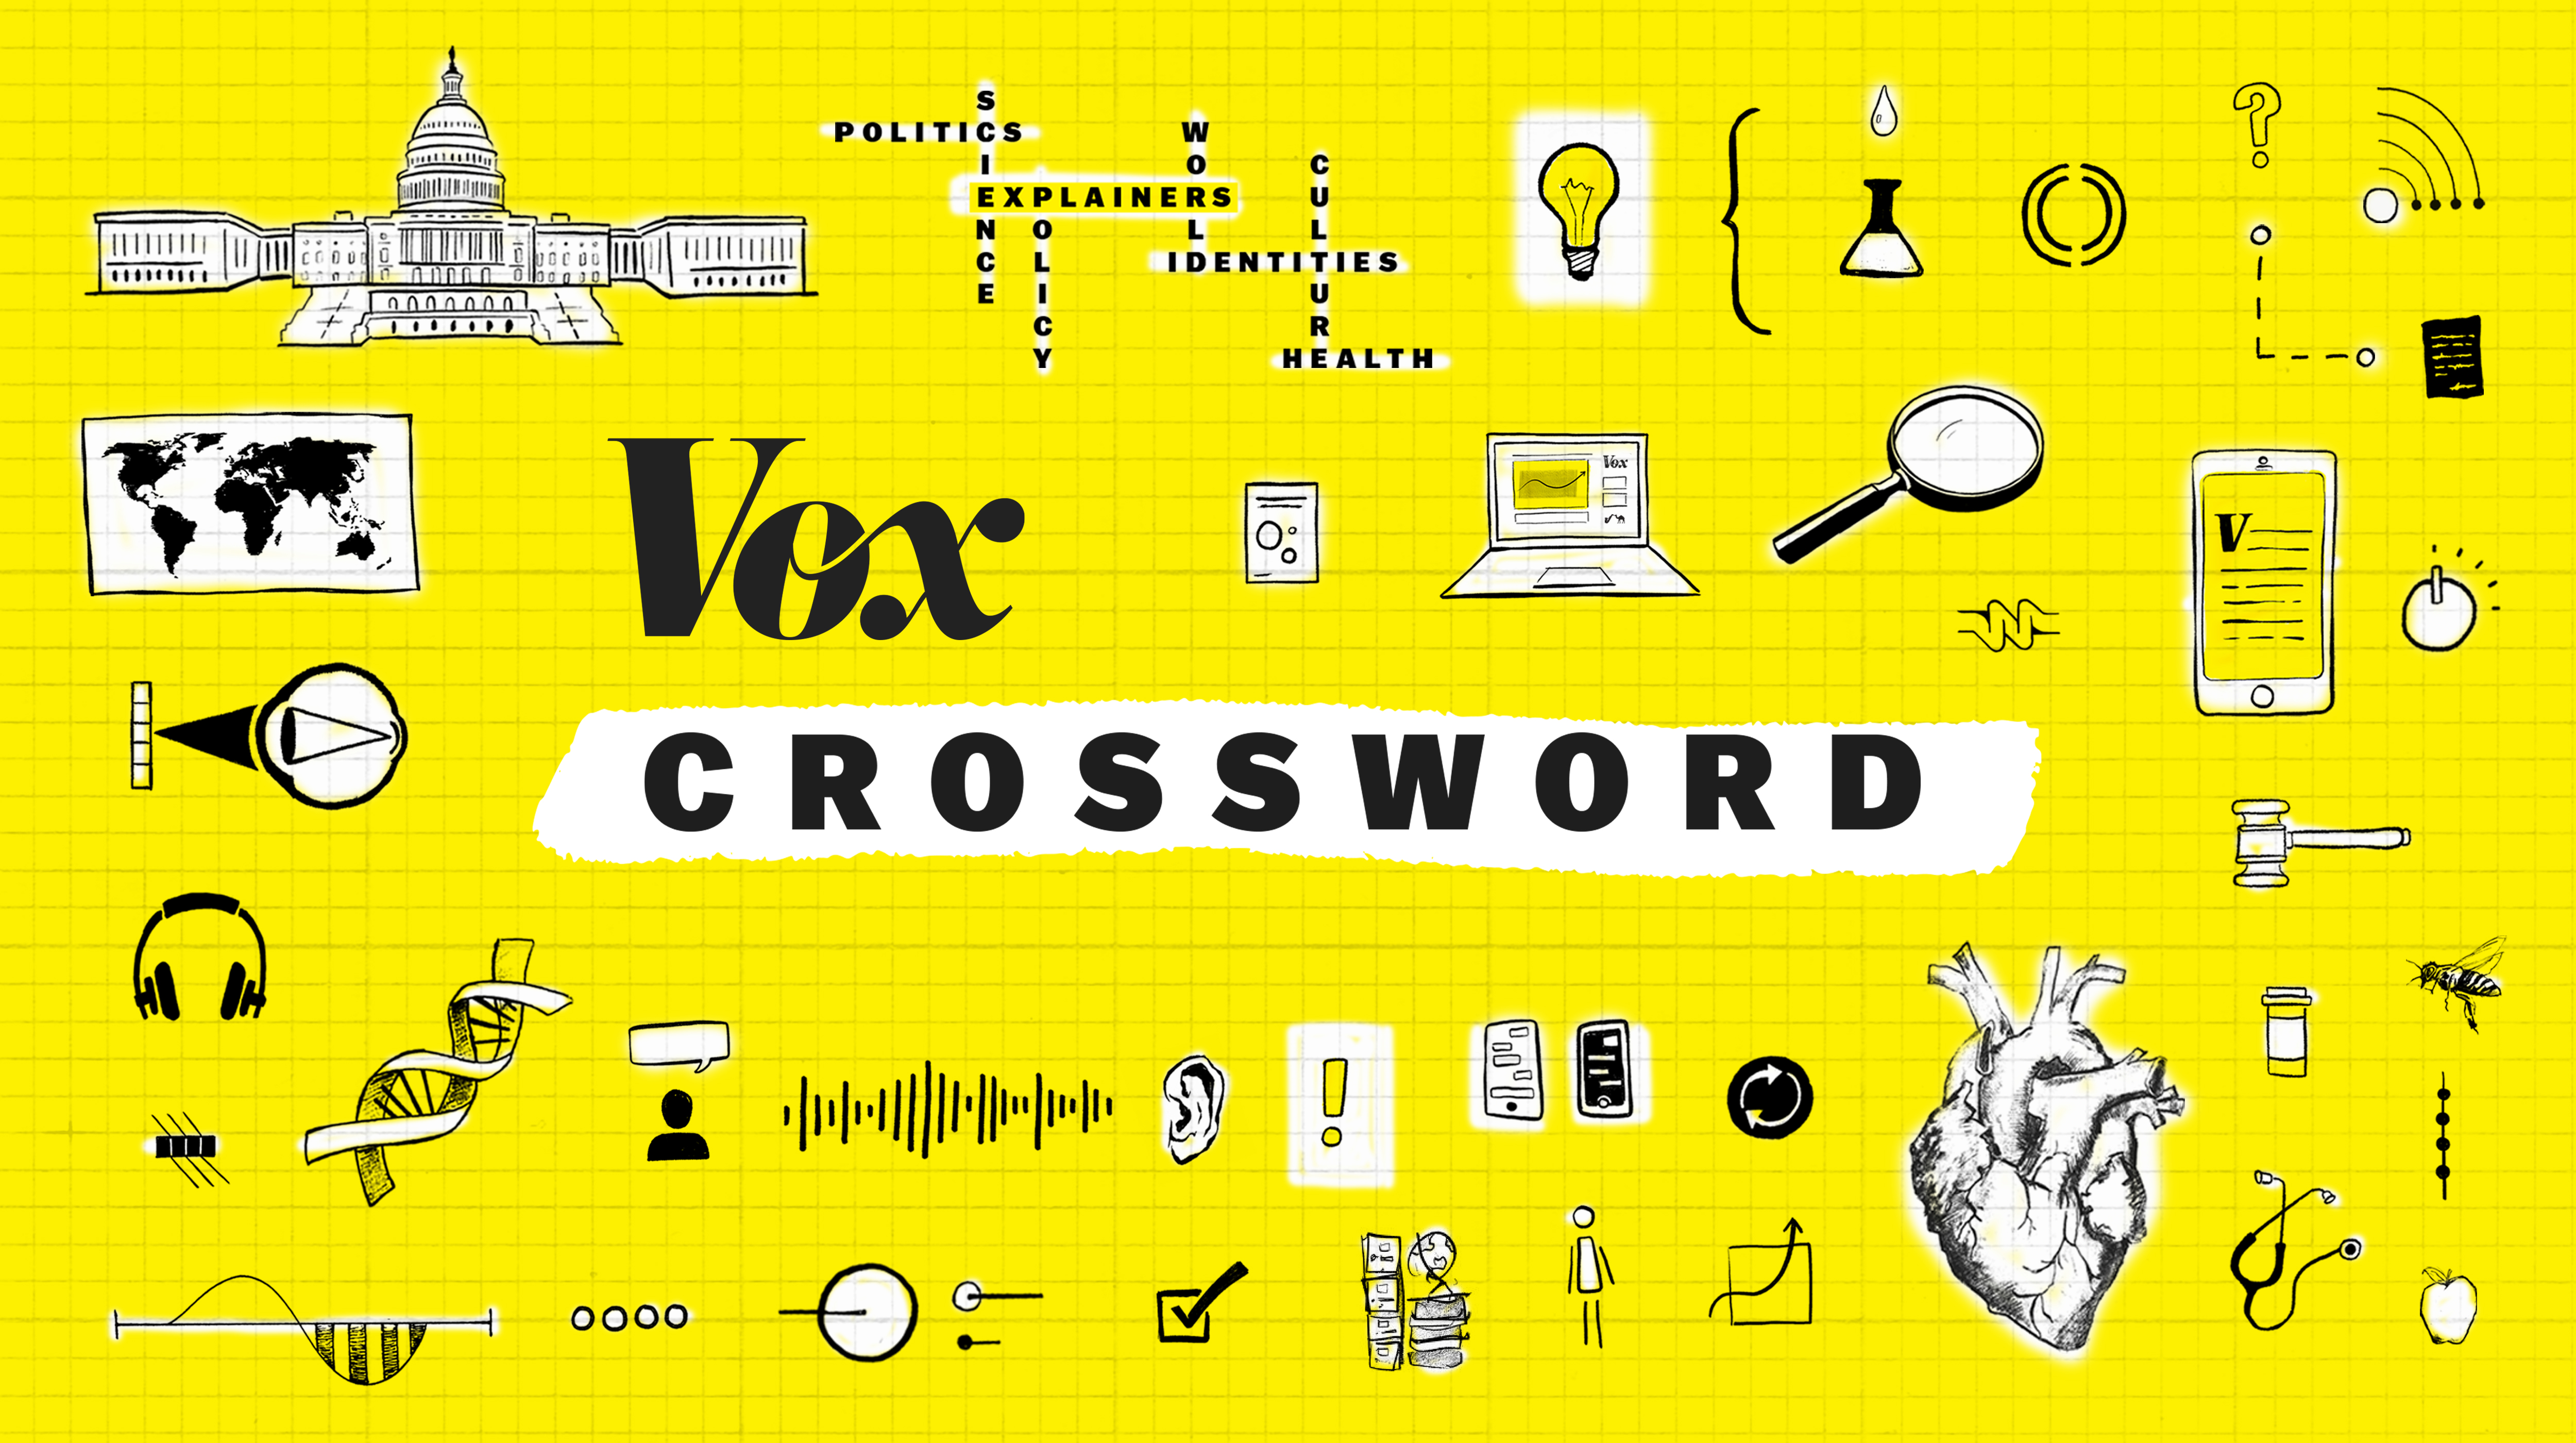 New Vox Crossword puzzles come out Monday through Saturday